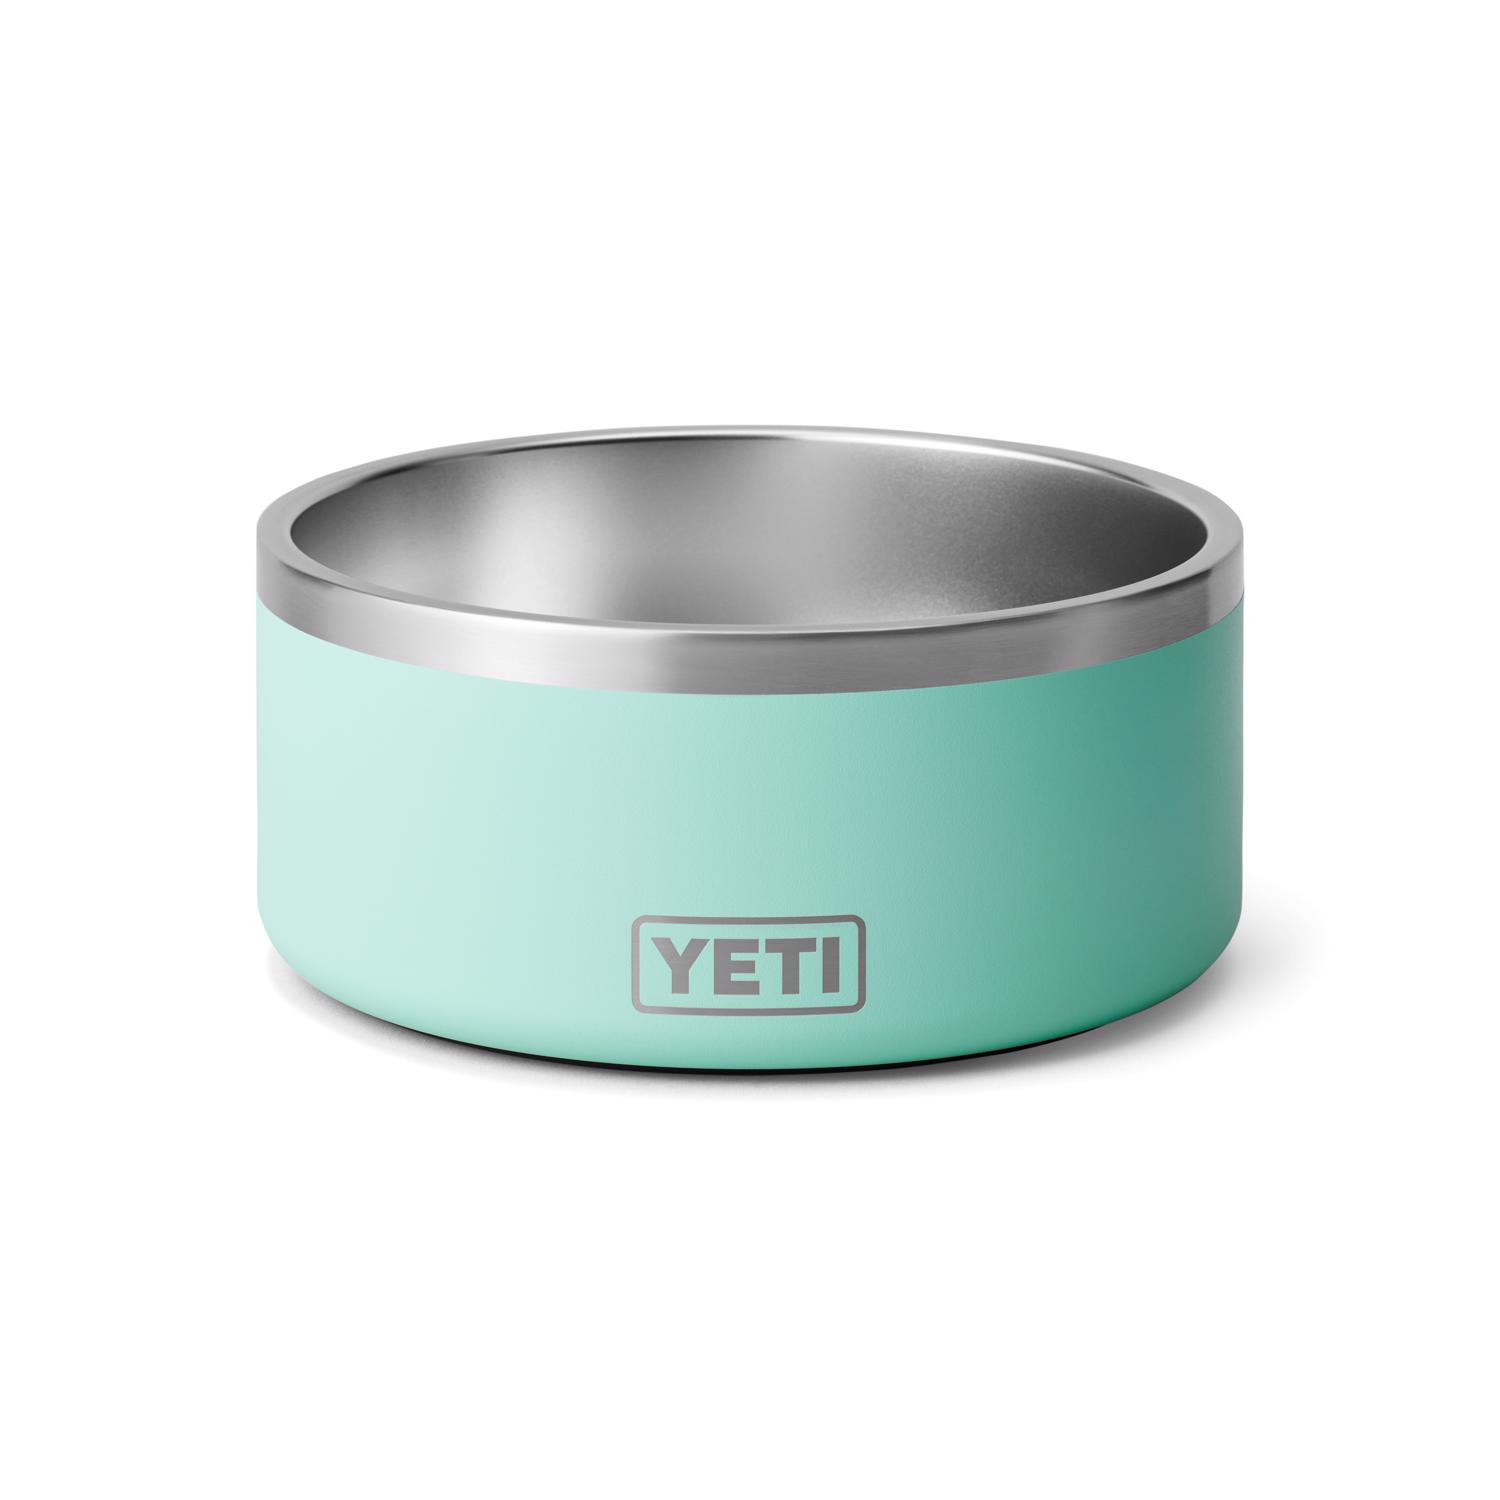 Photos - Other interior and decor Yeti Boomer Seafoam Stainless Steel 8 cups Pet Bowl For Dogs 21071500002 